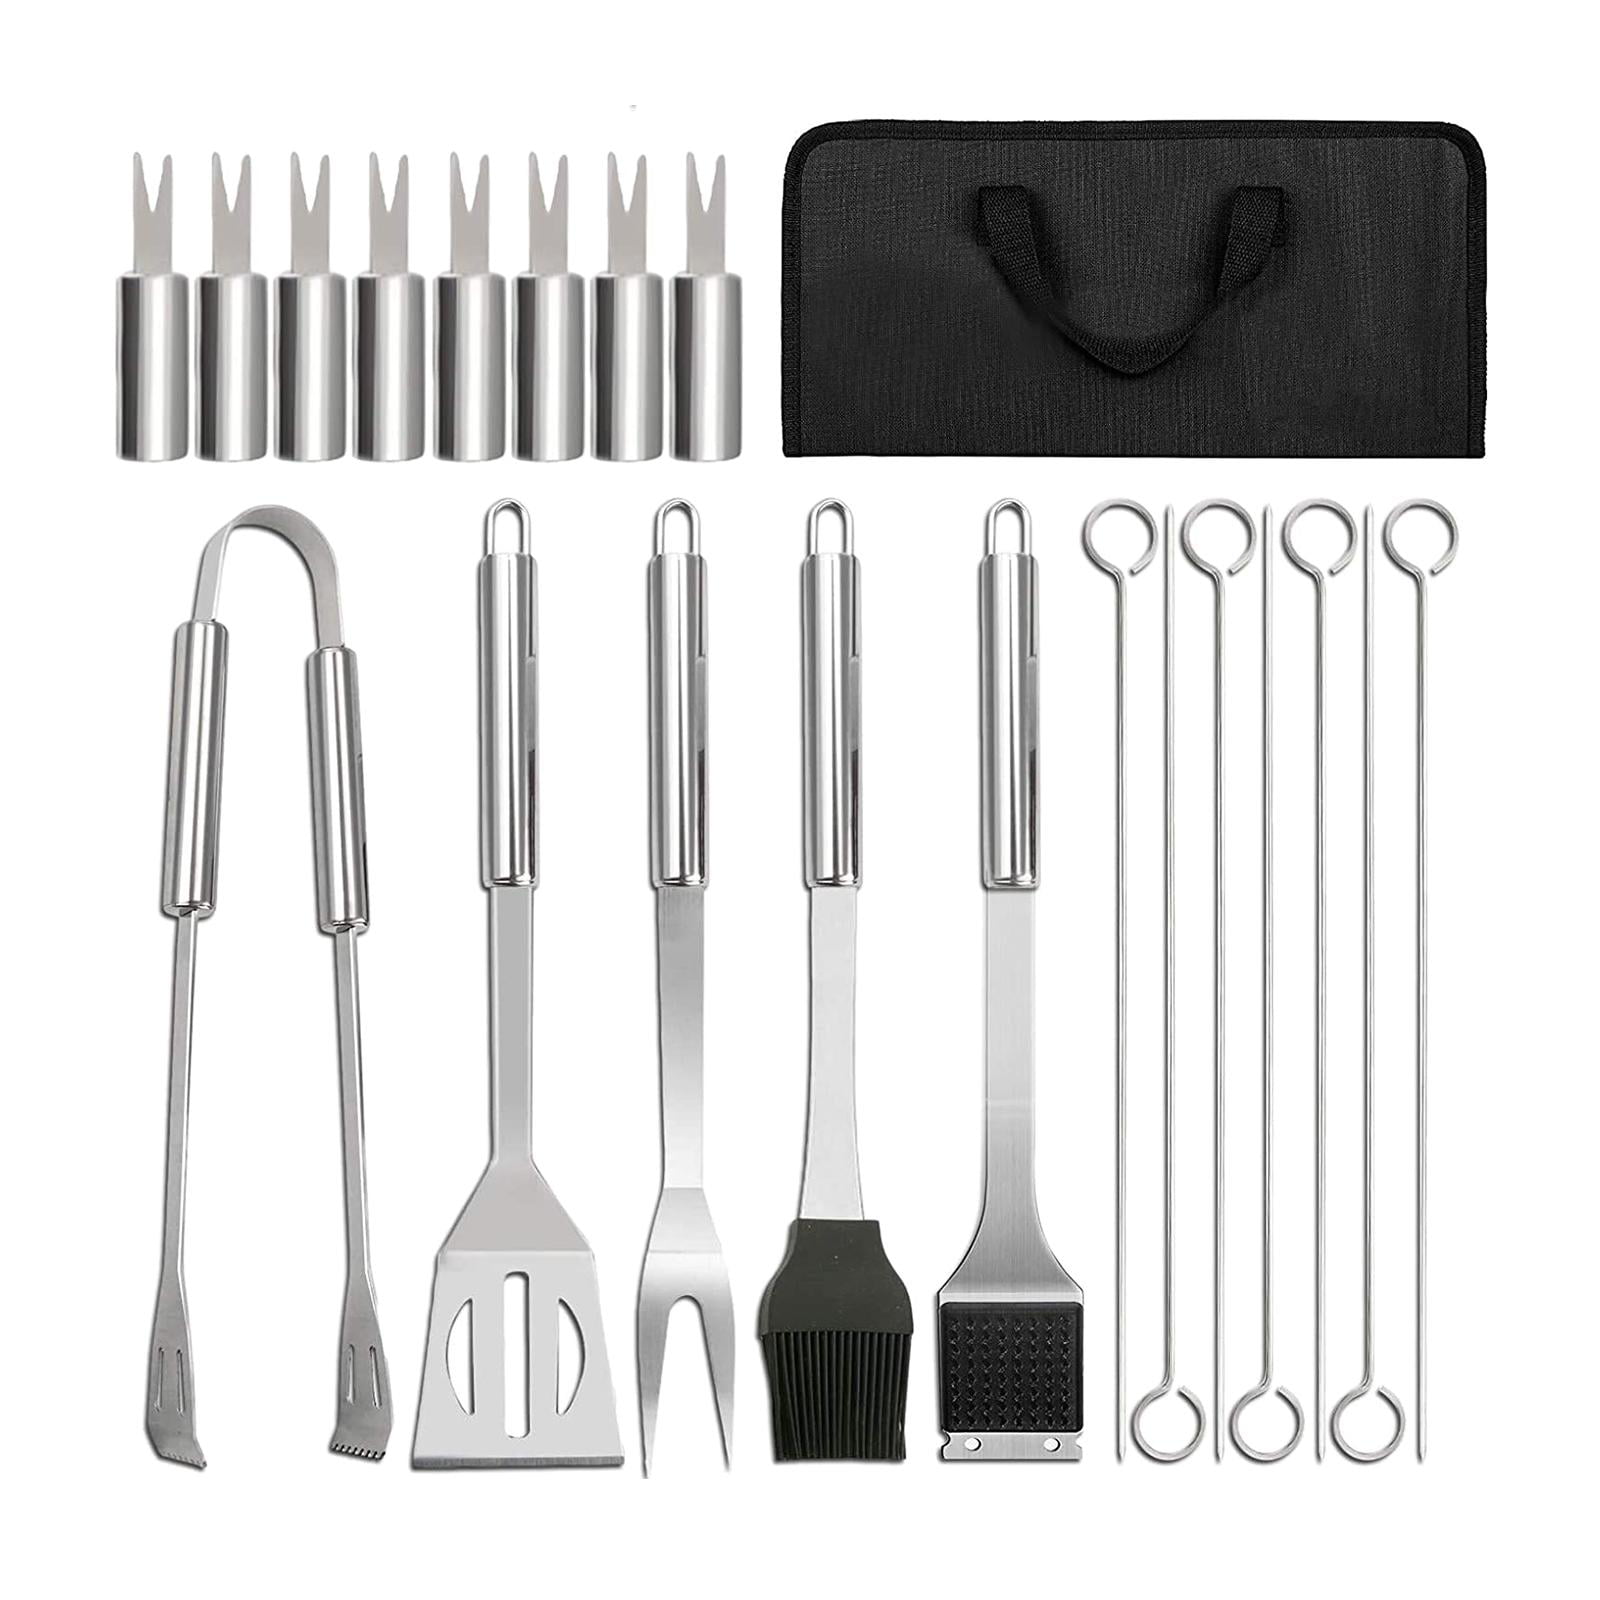 BBQ Grilling Tools Set 3 Piece Utensils Kit Includes Spatula Tongs & Fork Heavy Duty 20% Thicker Stainless Steel Unique Birthday Gift Idea for Dad Professional Grade Barbecue Accessories 